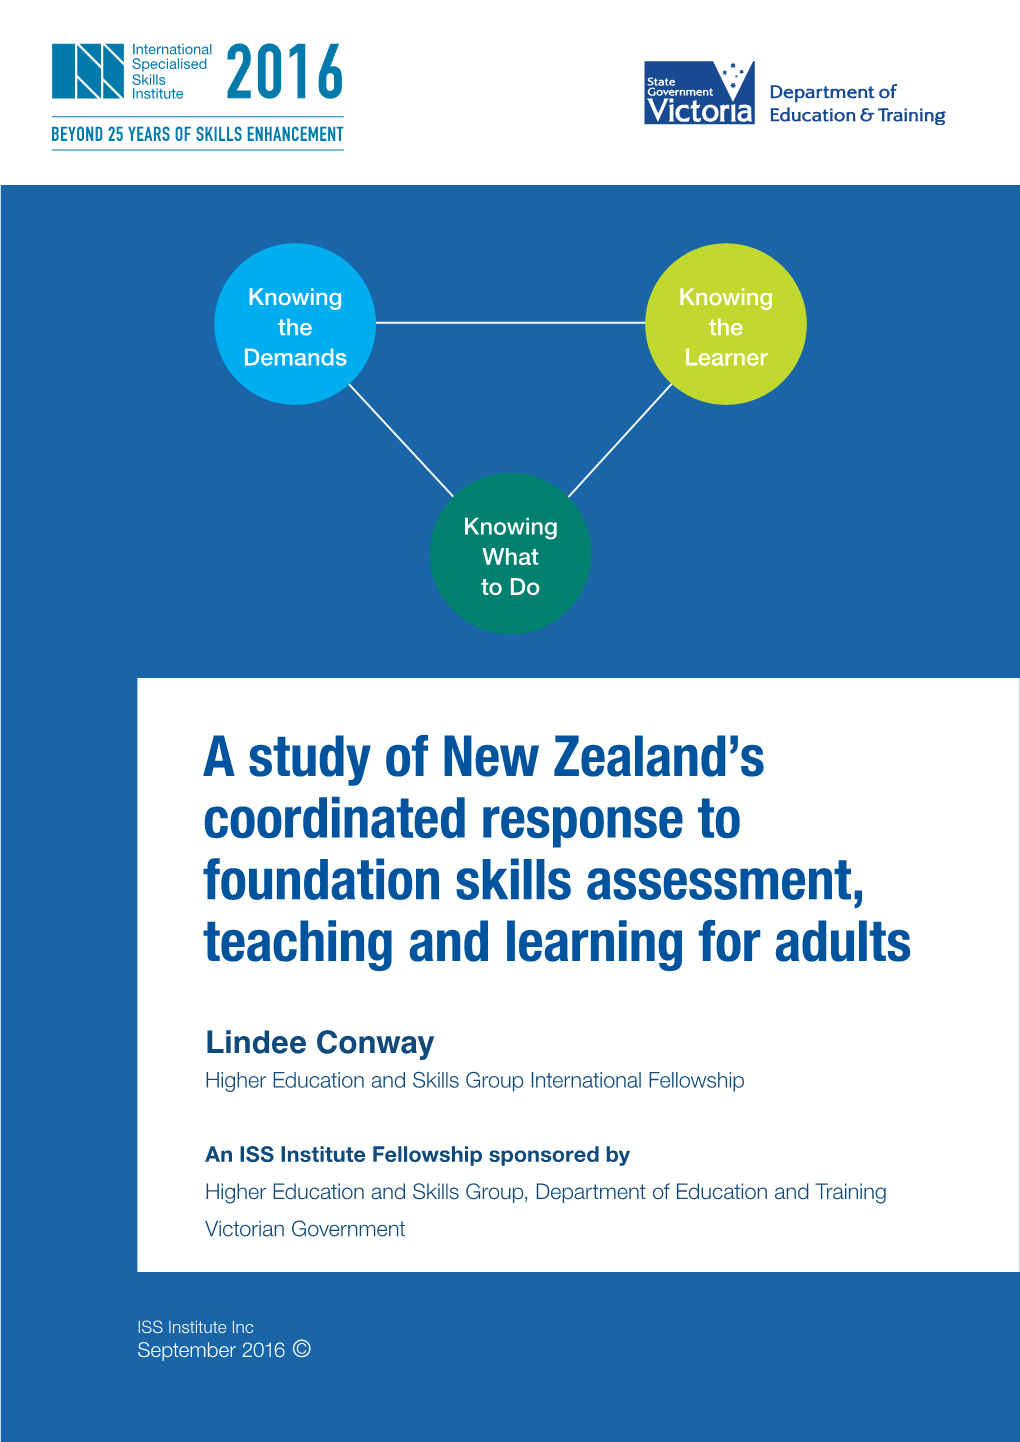 A Study of New Zealand's Coordinated Response to Foundation Skills